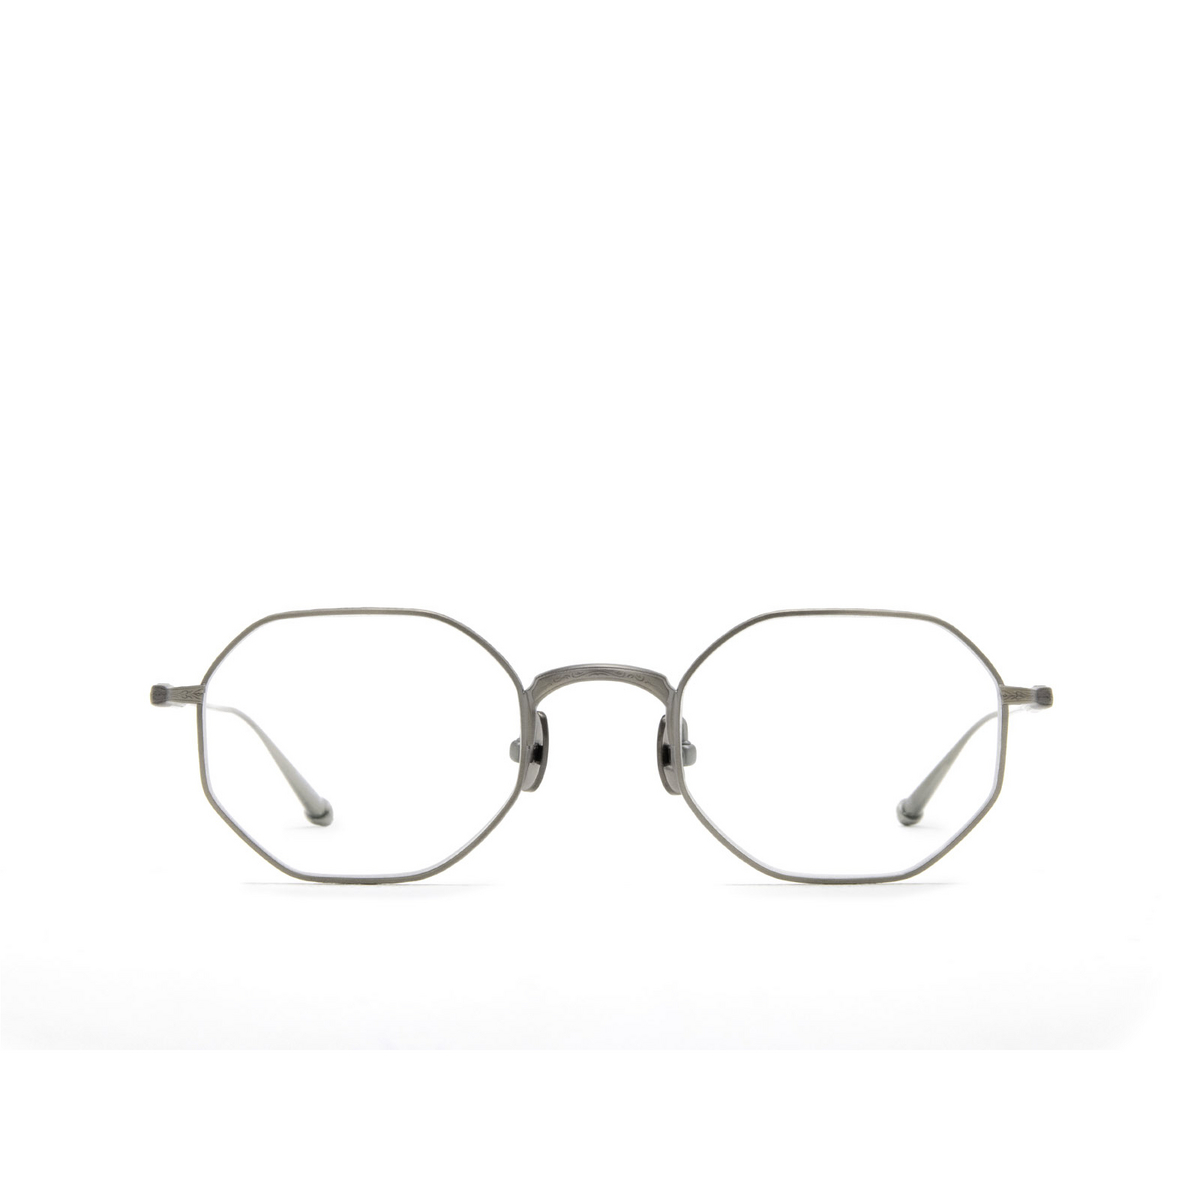 Matsuda® Square Eyeglasses: M3086 OPT color Antique Silver As - front view.